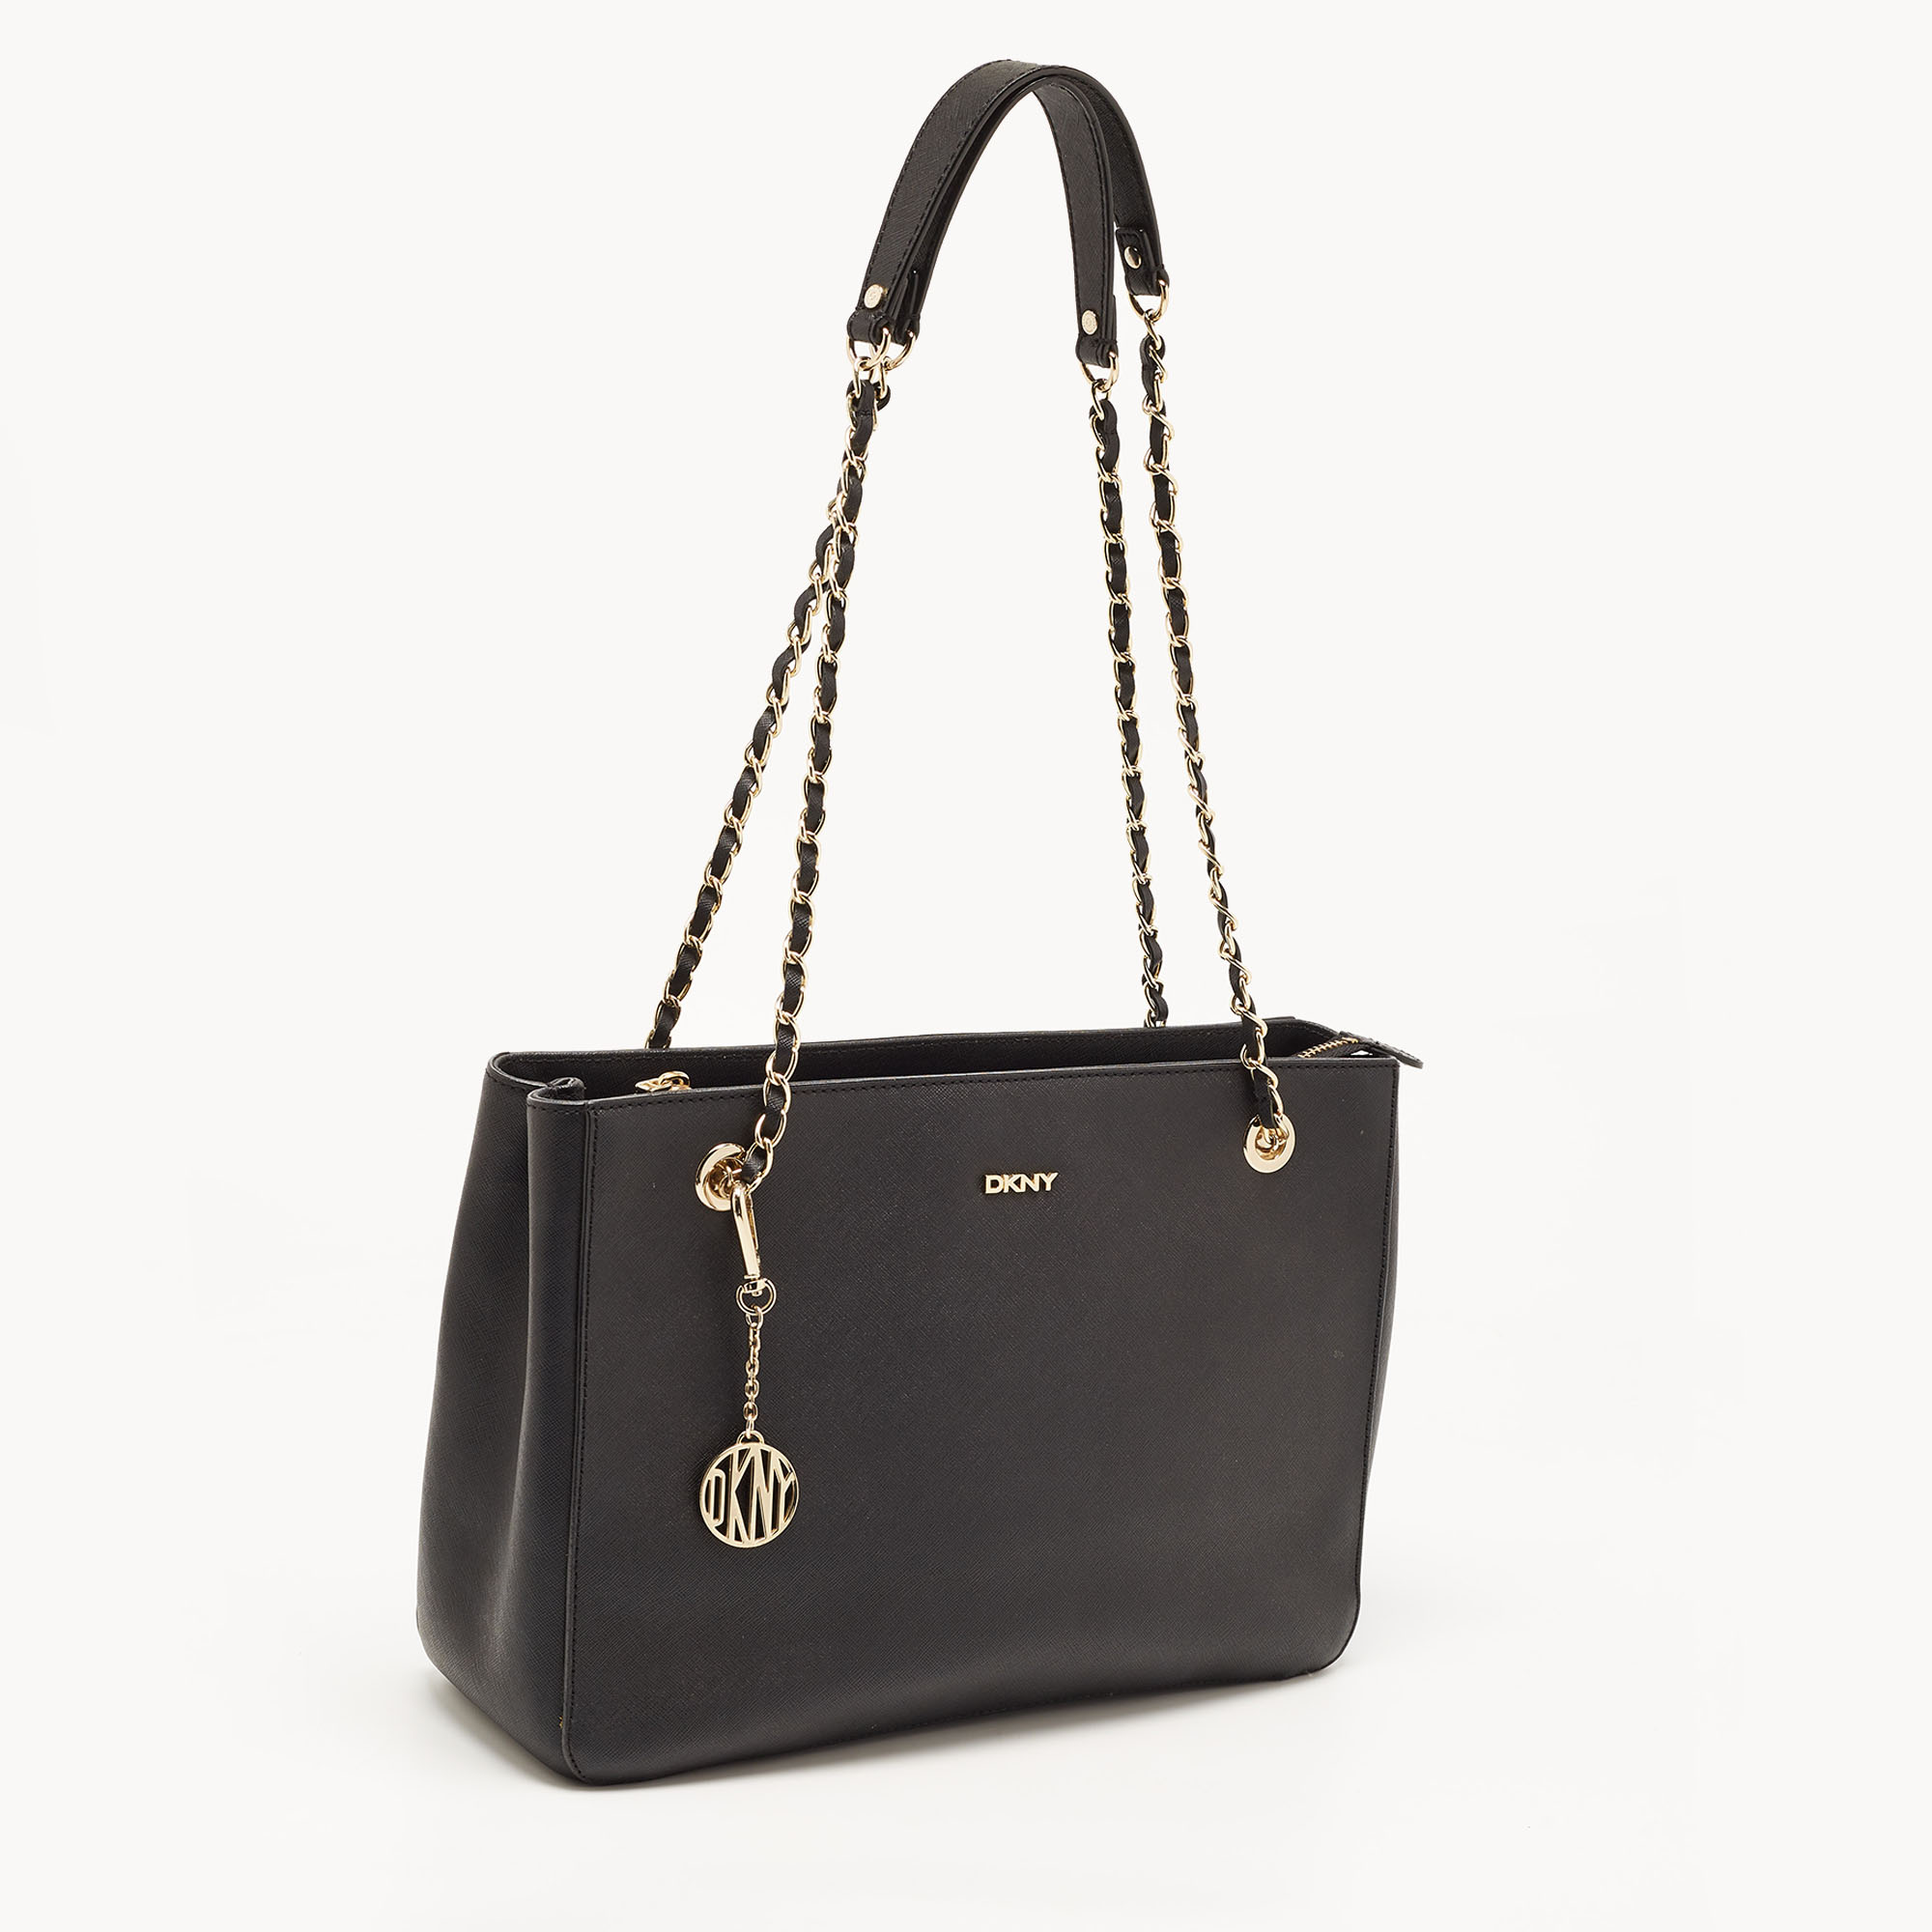 DKNY Black Saffiano Leather Bryant Park Chain Tote